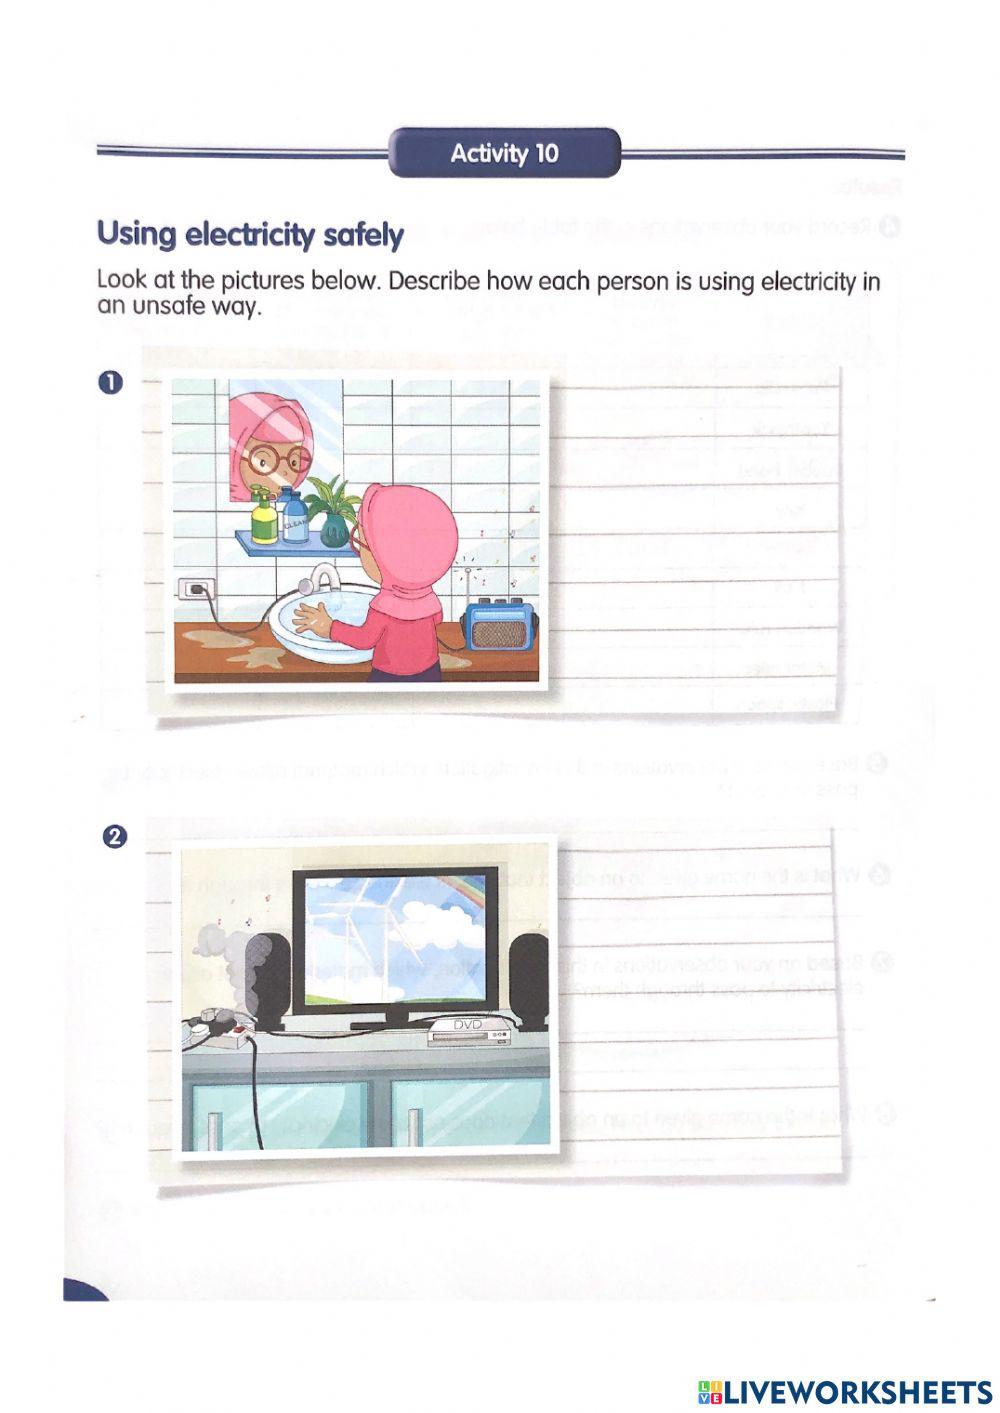 Using electricity safely